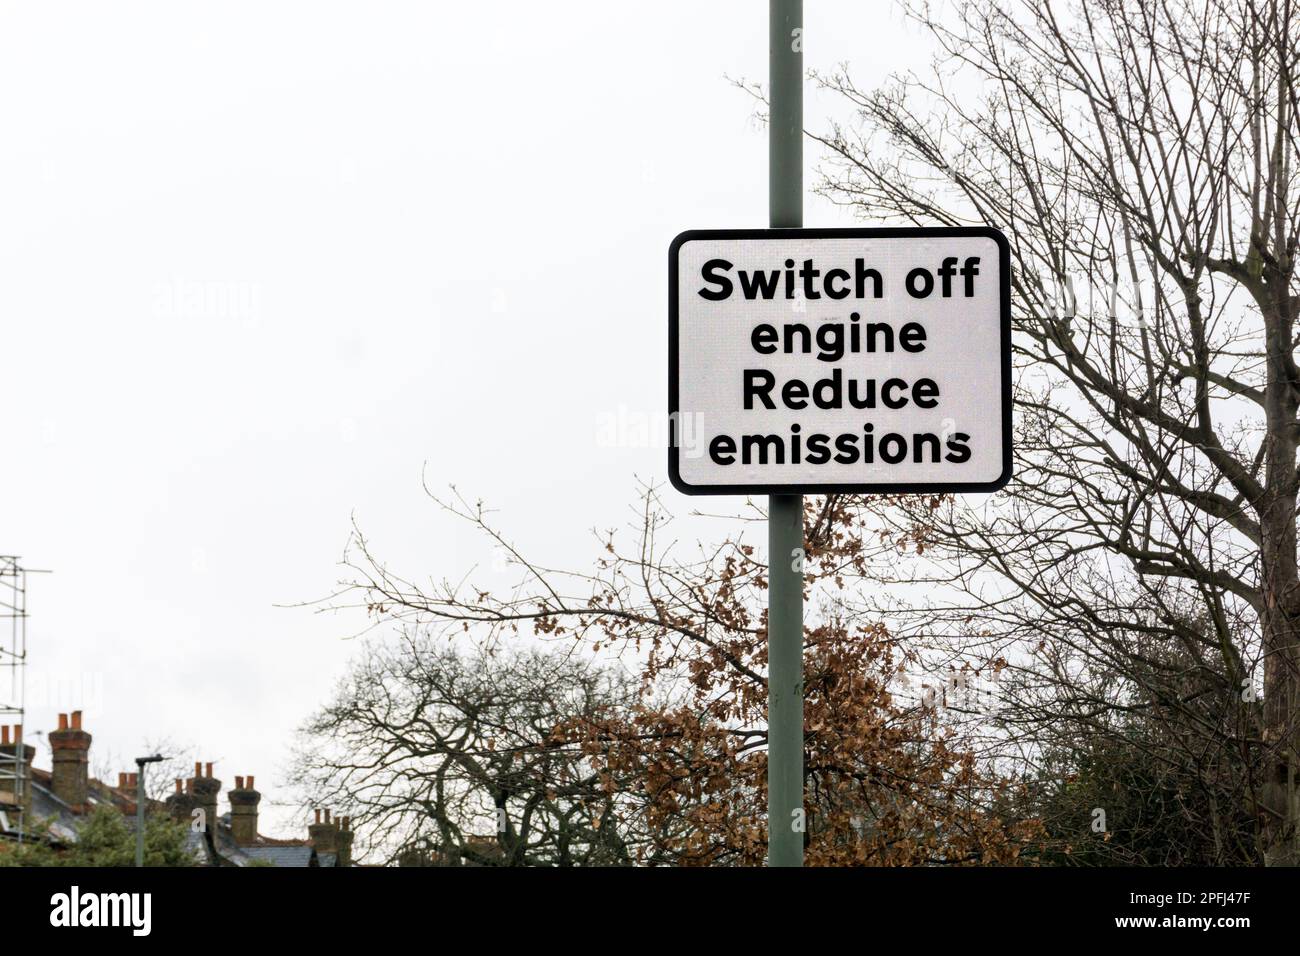 A roadsign in south London advises drivers to switch off their car engines to reduce emissions. Stock Photo